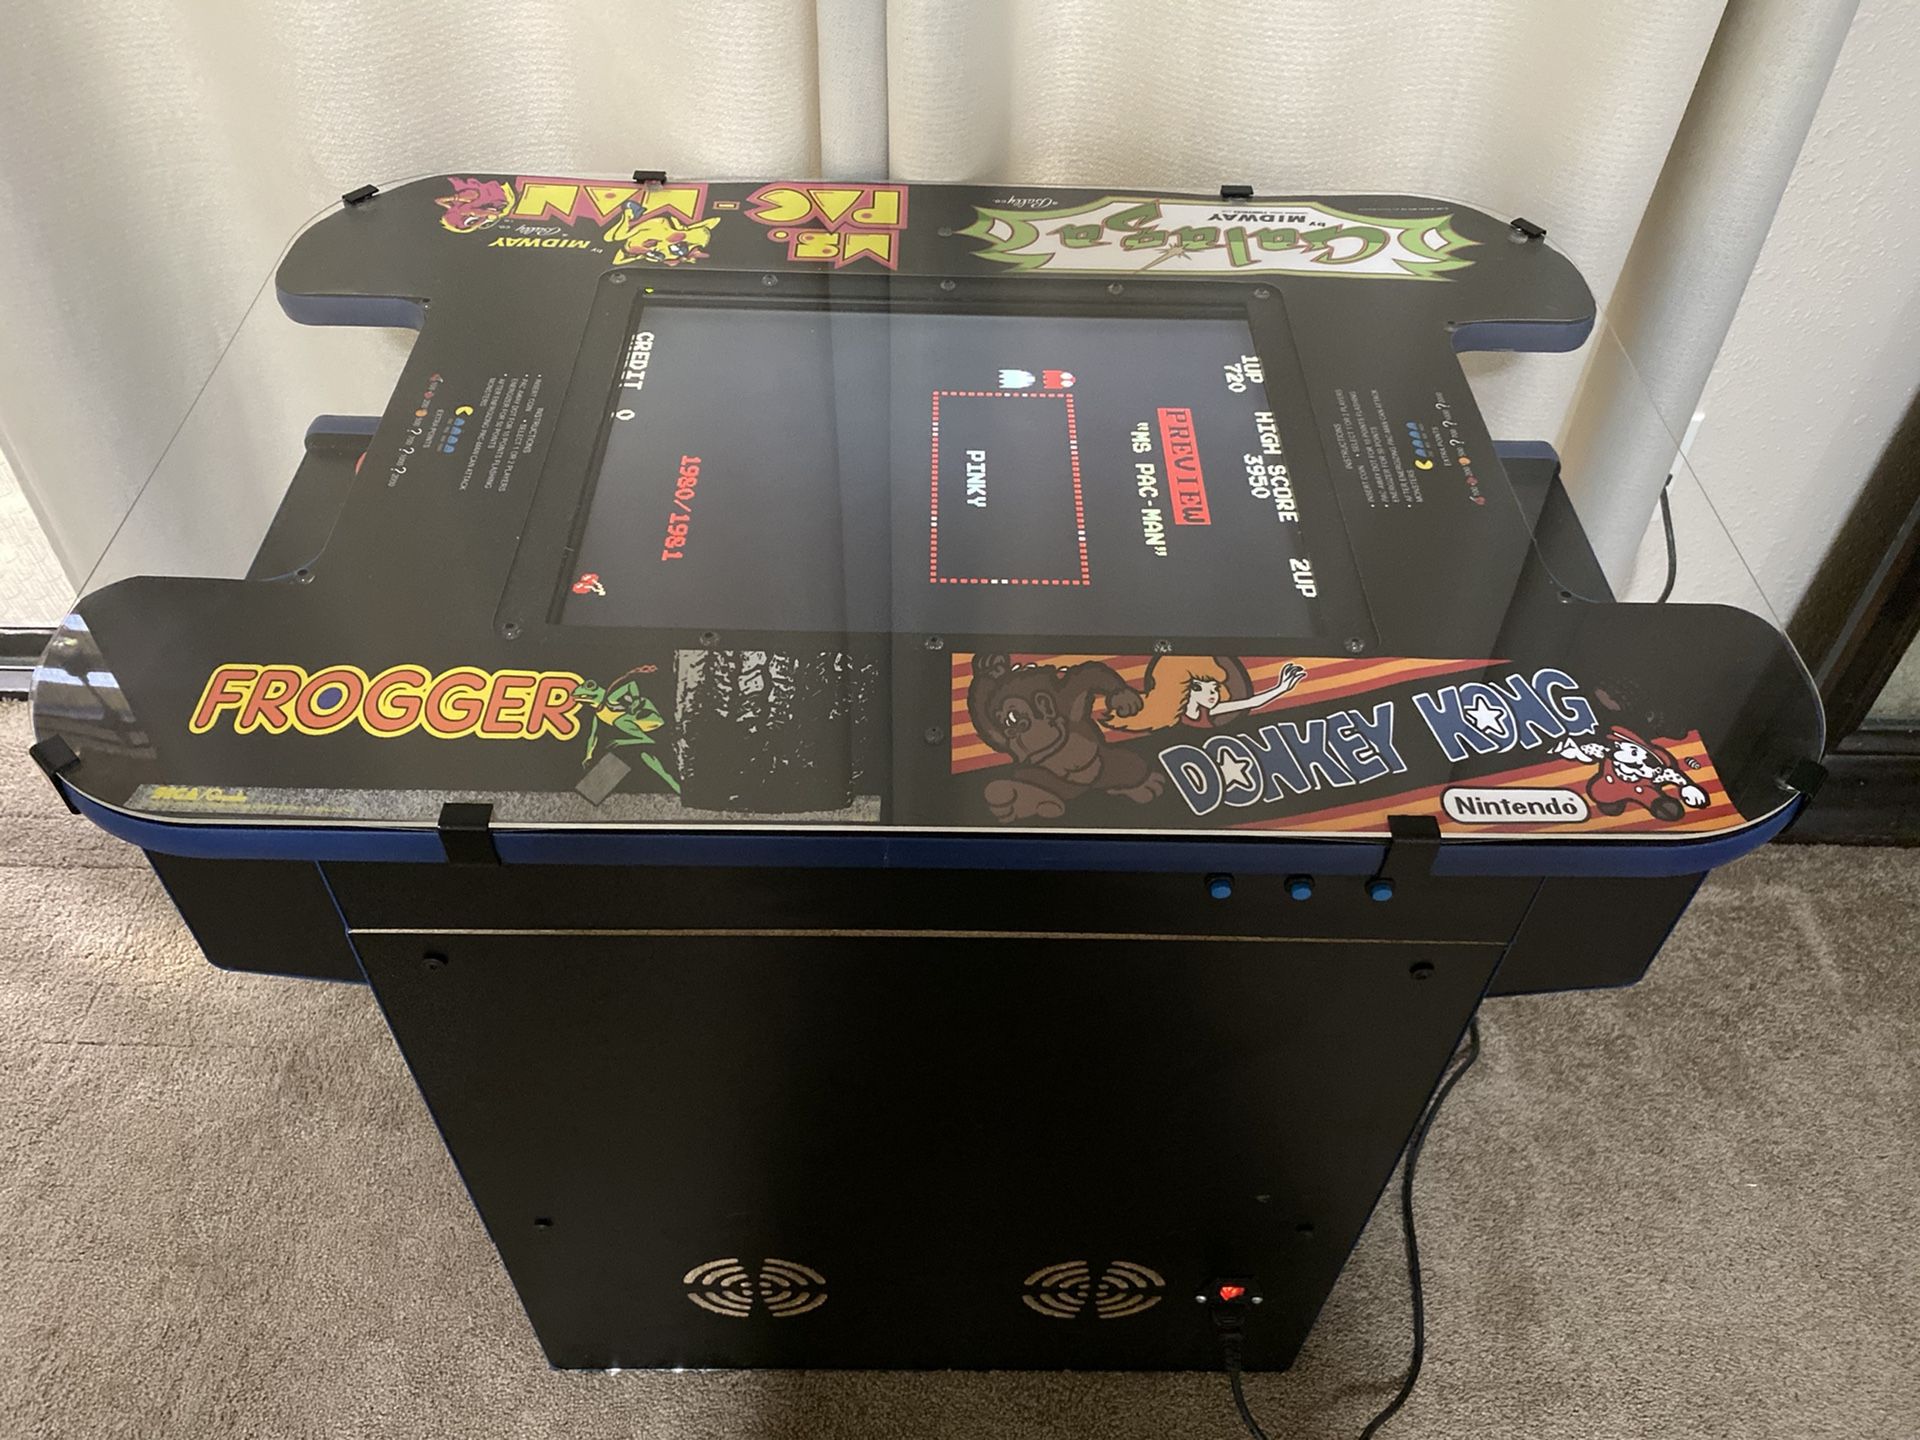 NEW- Arcade cocktail table- 60 games! PAC-man, Donkey Kong++